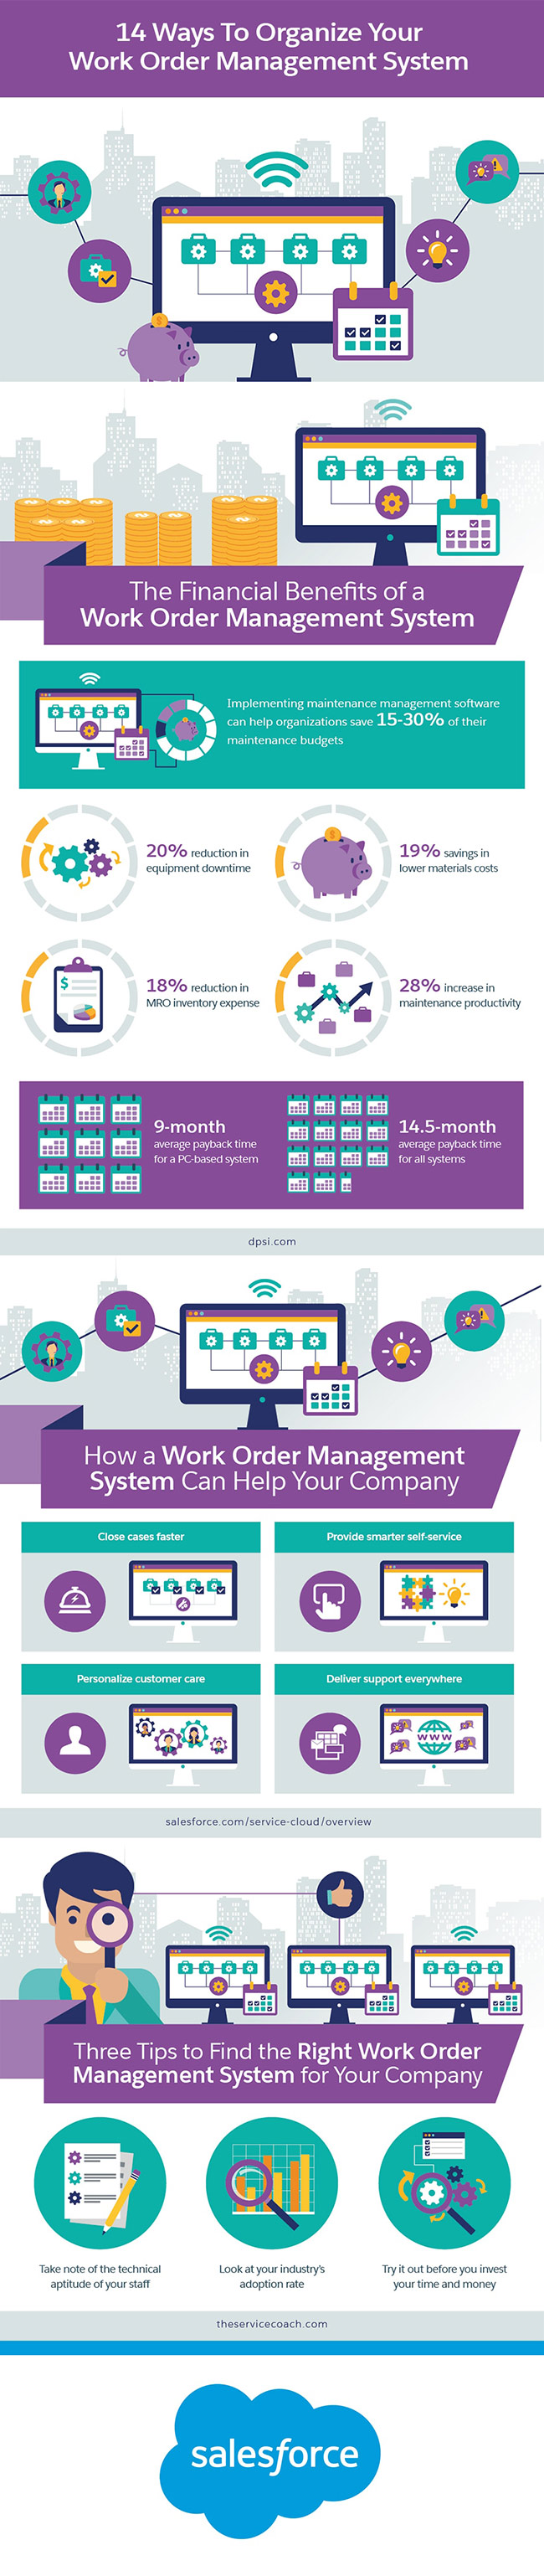 14 Ways To Organize Your Work Order Management System